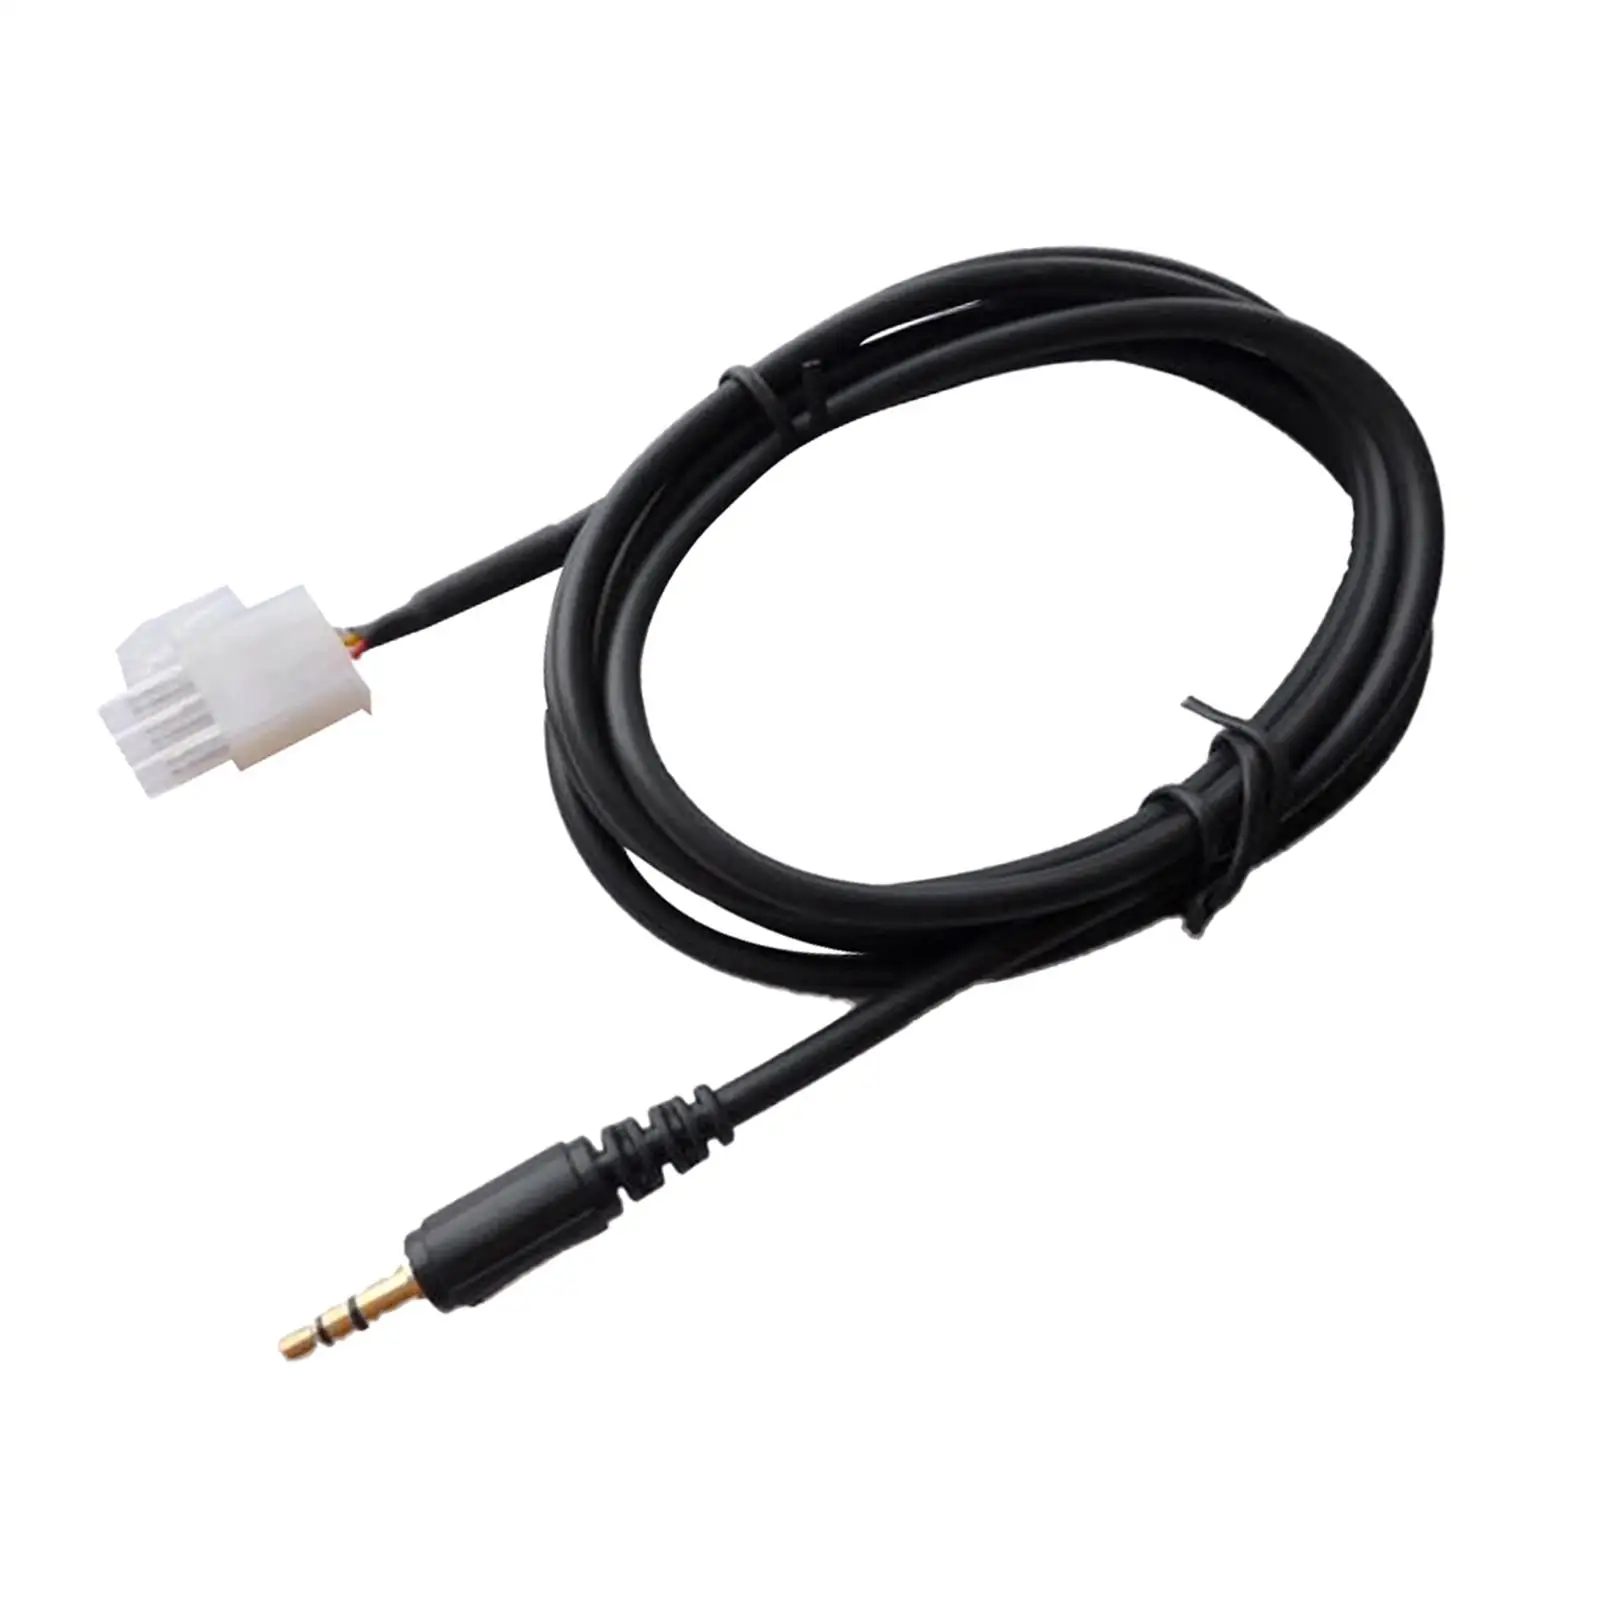 1. Motorcycle MP Adapter 3.5mm AUX Cord Cable for  0, 2013-2014  F6B 